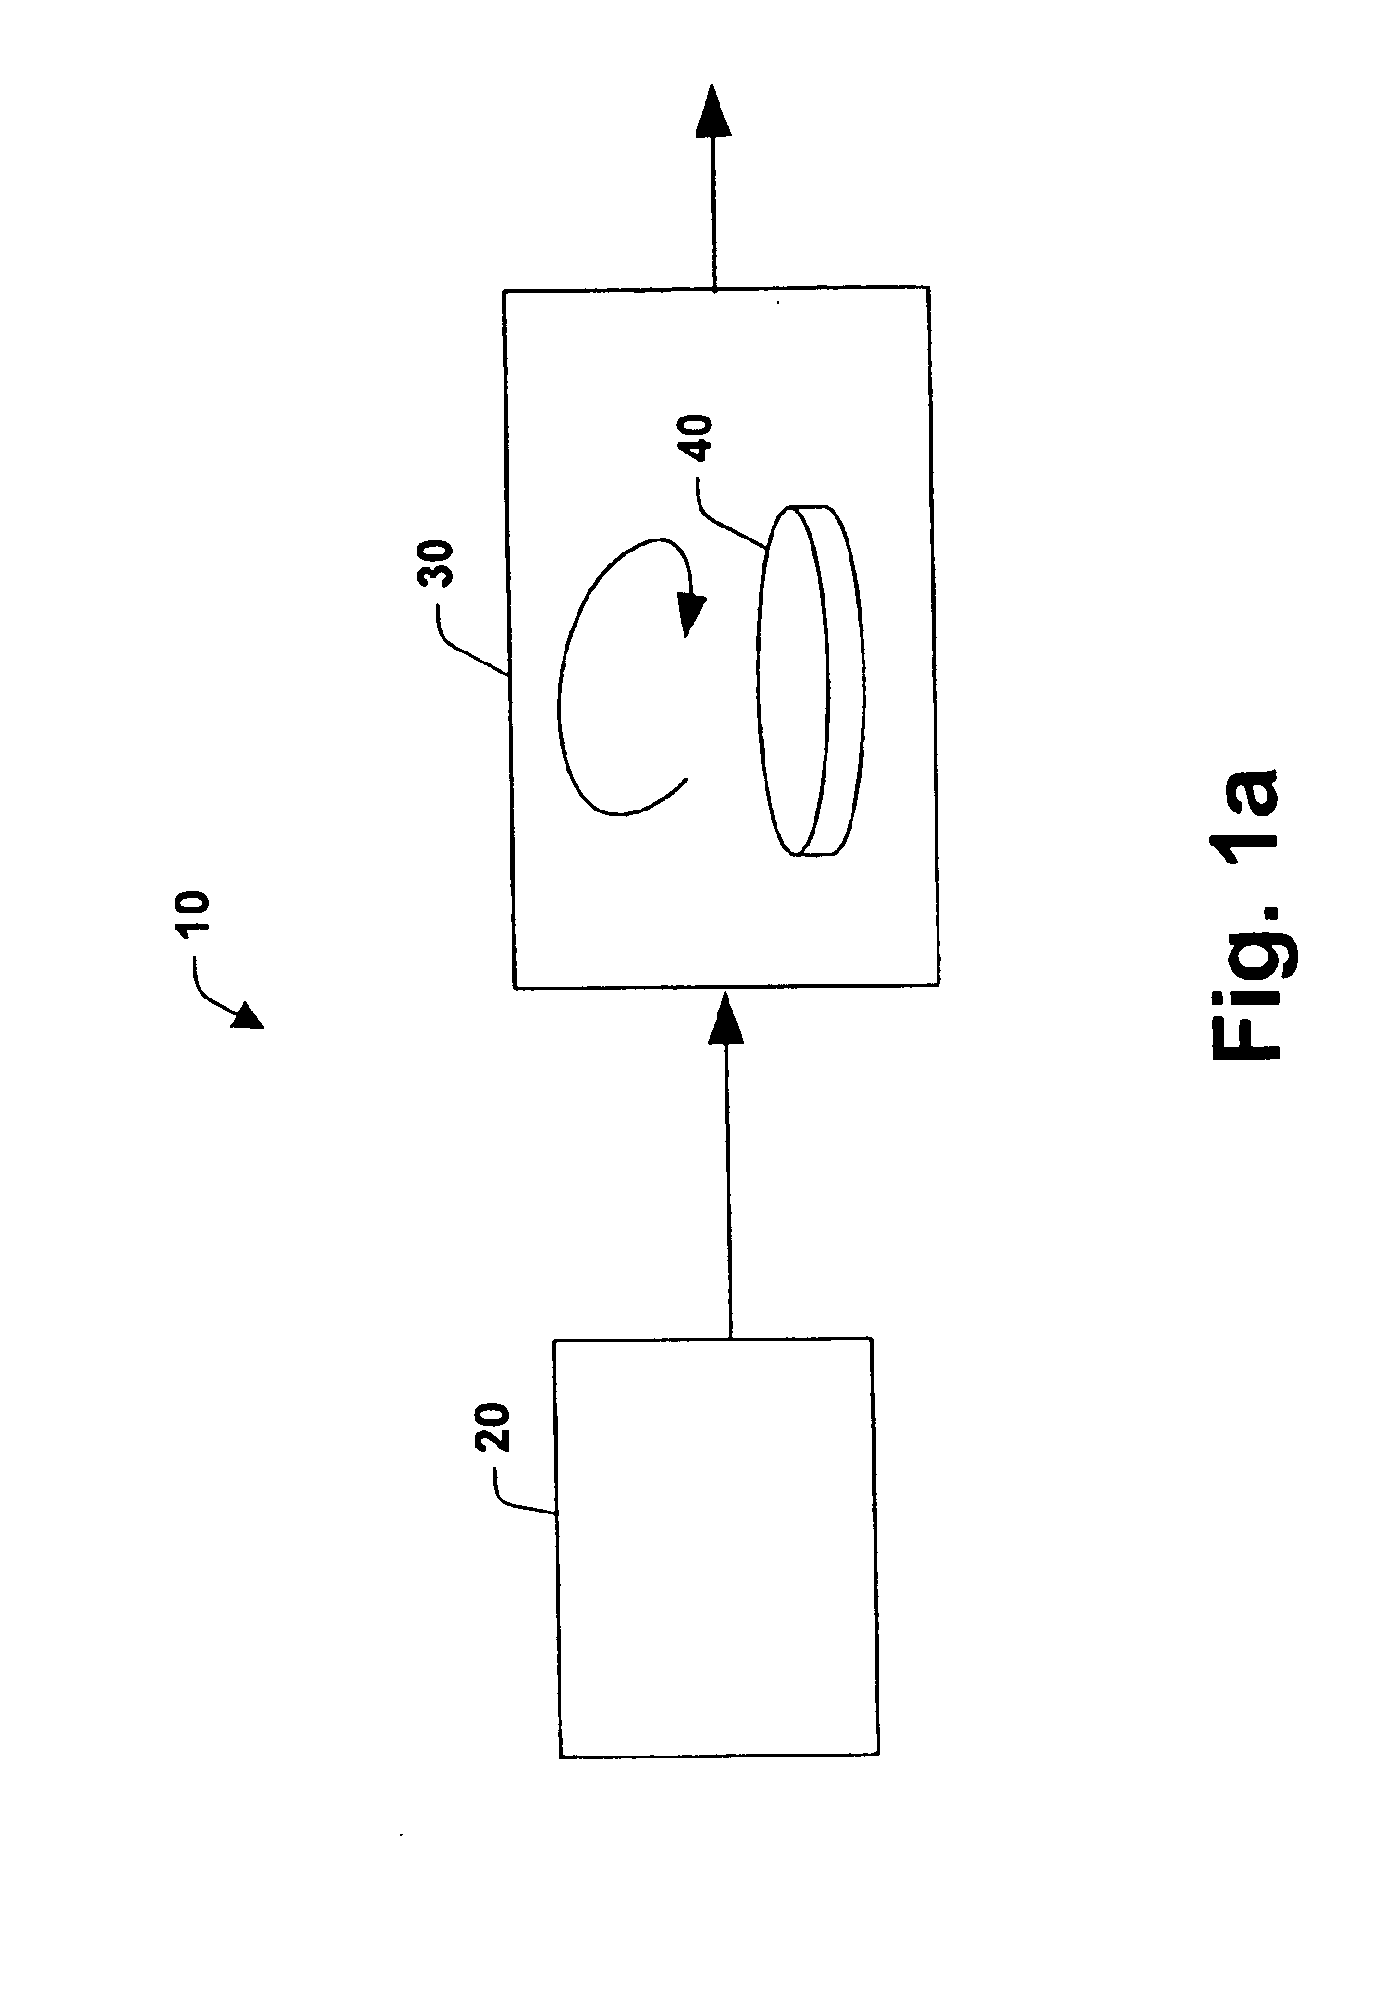 System for rapidly and uniformly cooling resist